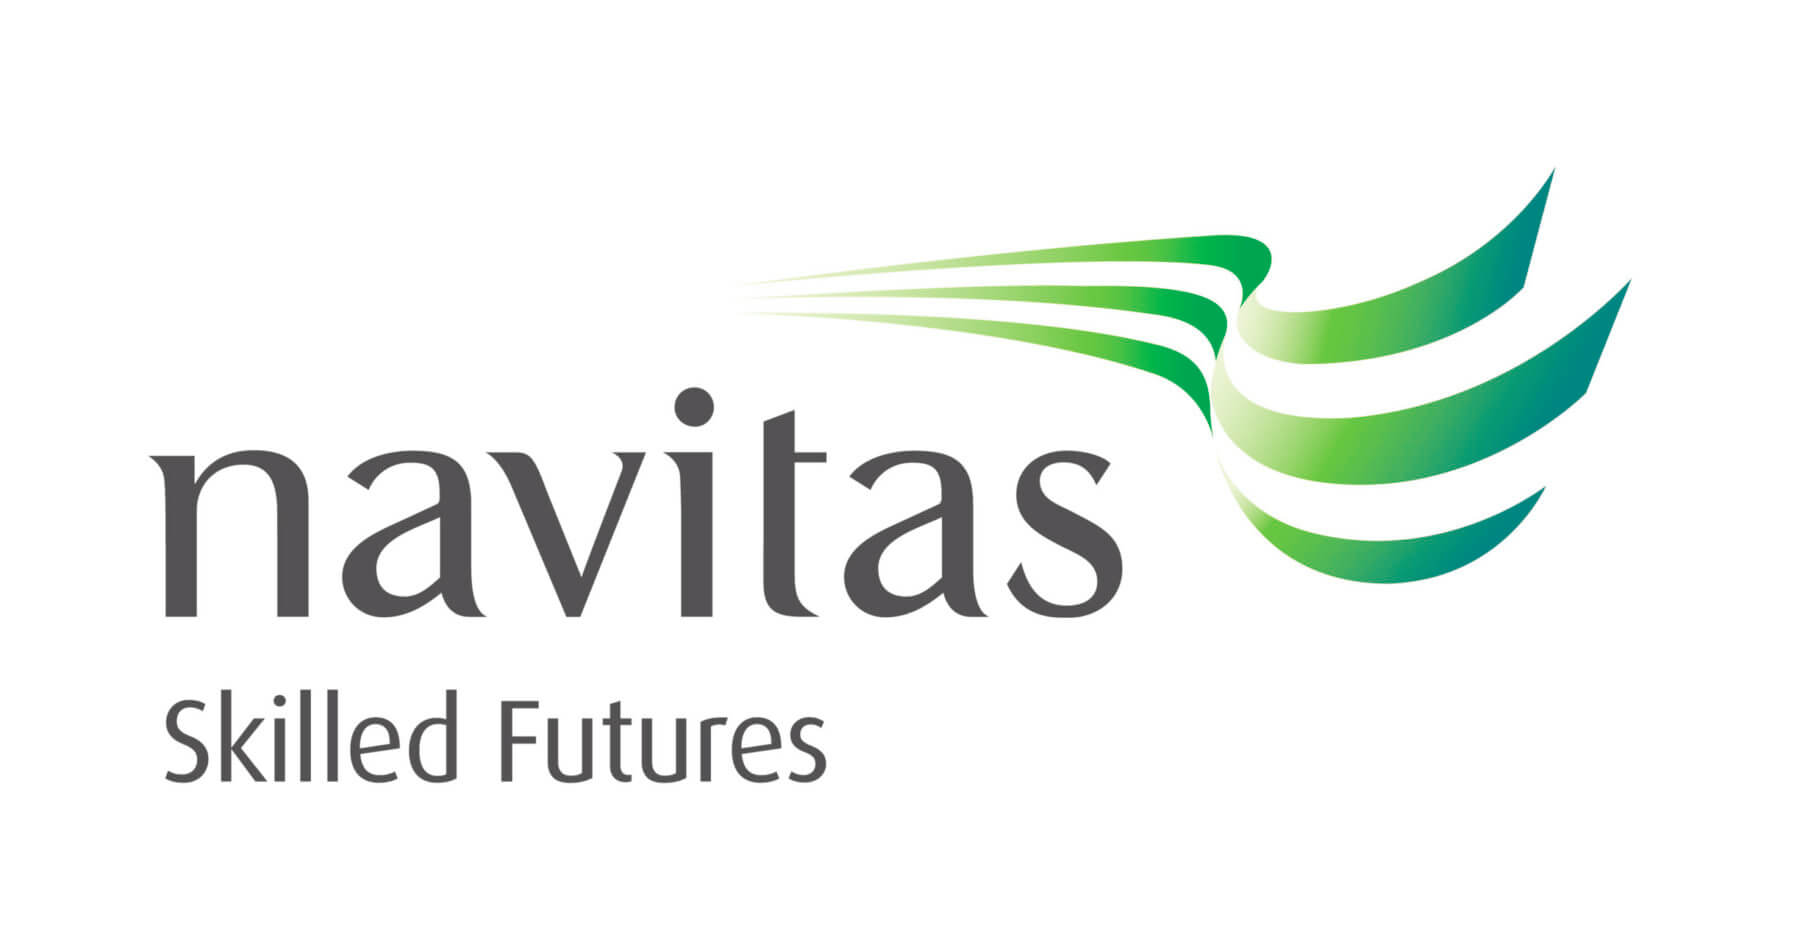 A large Navitas Skilled Futures logo for workplace training in Australia